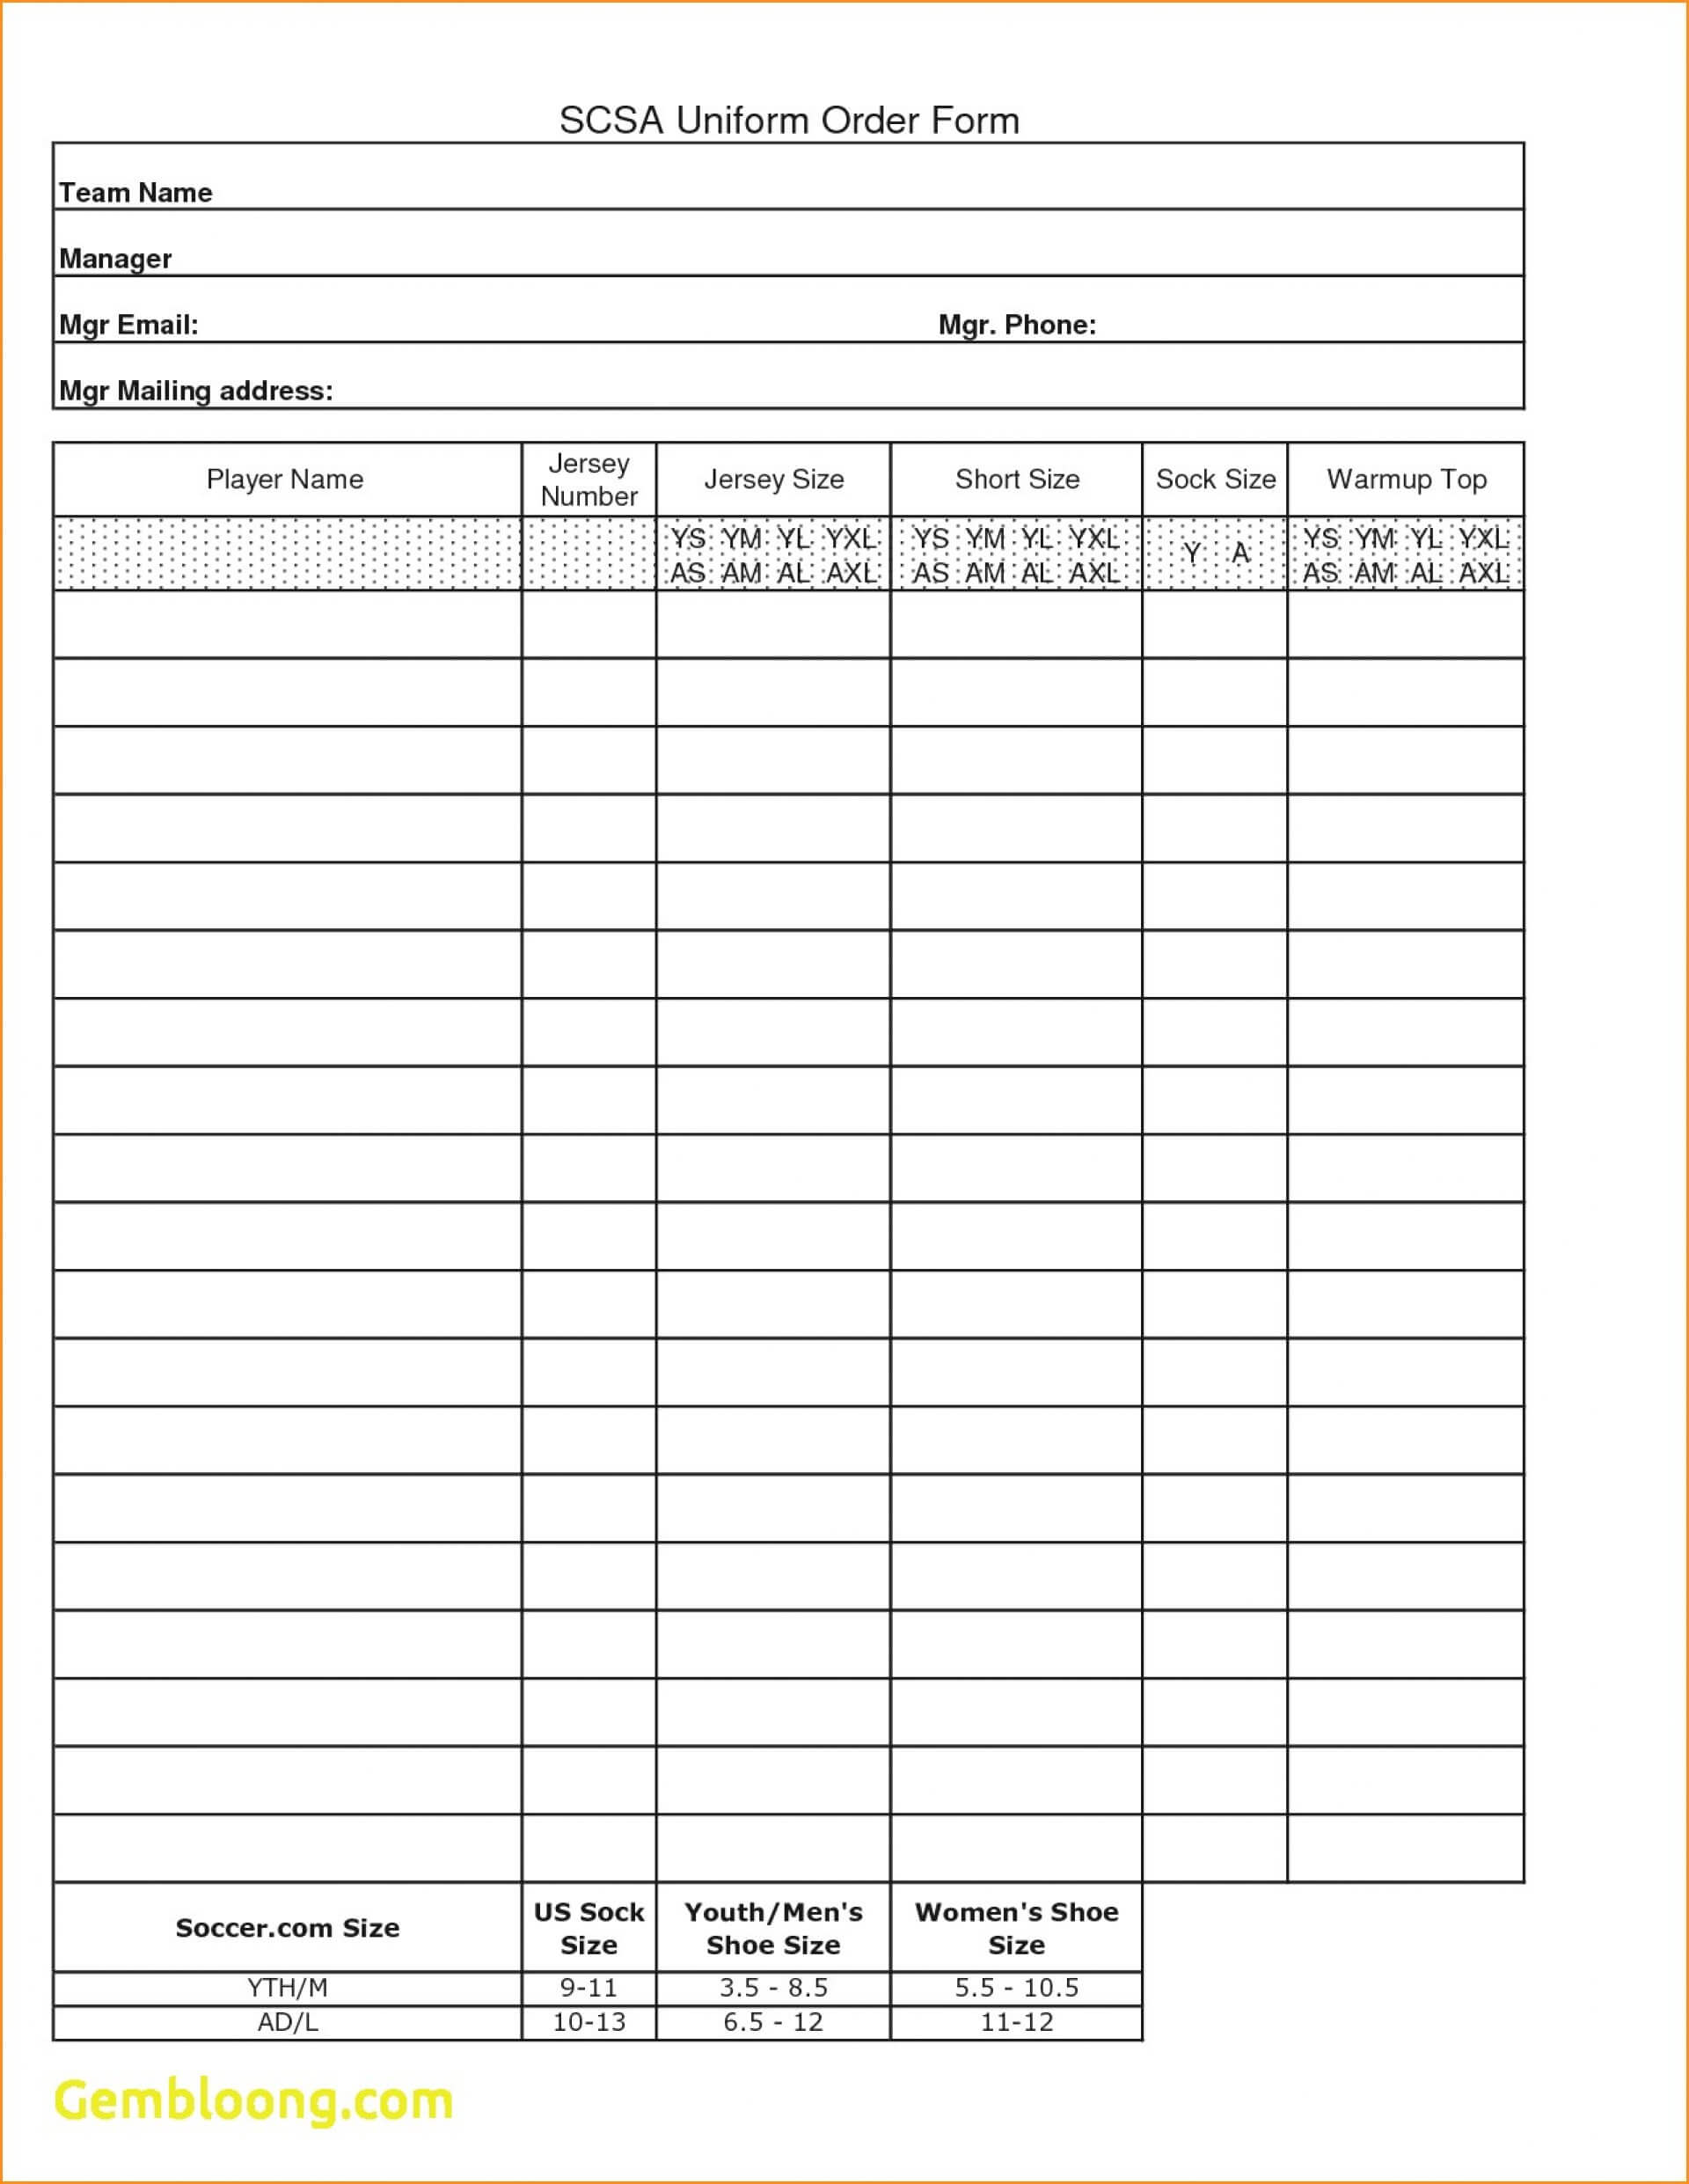 034 Blank Fundraiser Order Form Template Free Mary Resume For Blank Fundraiser Order Form Template